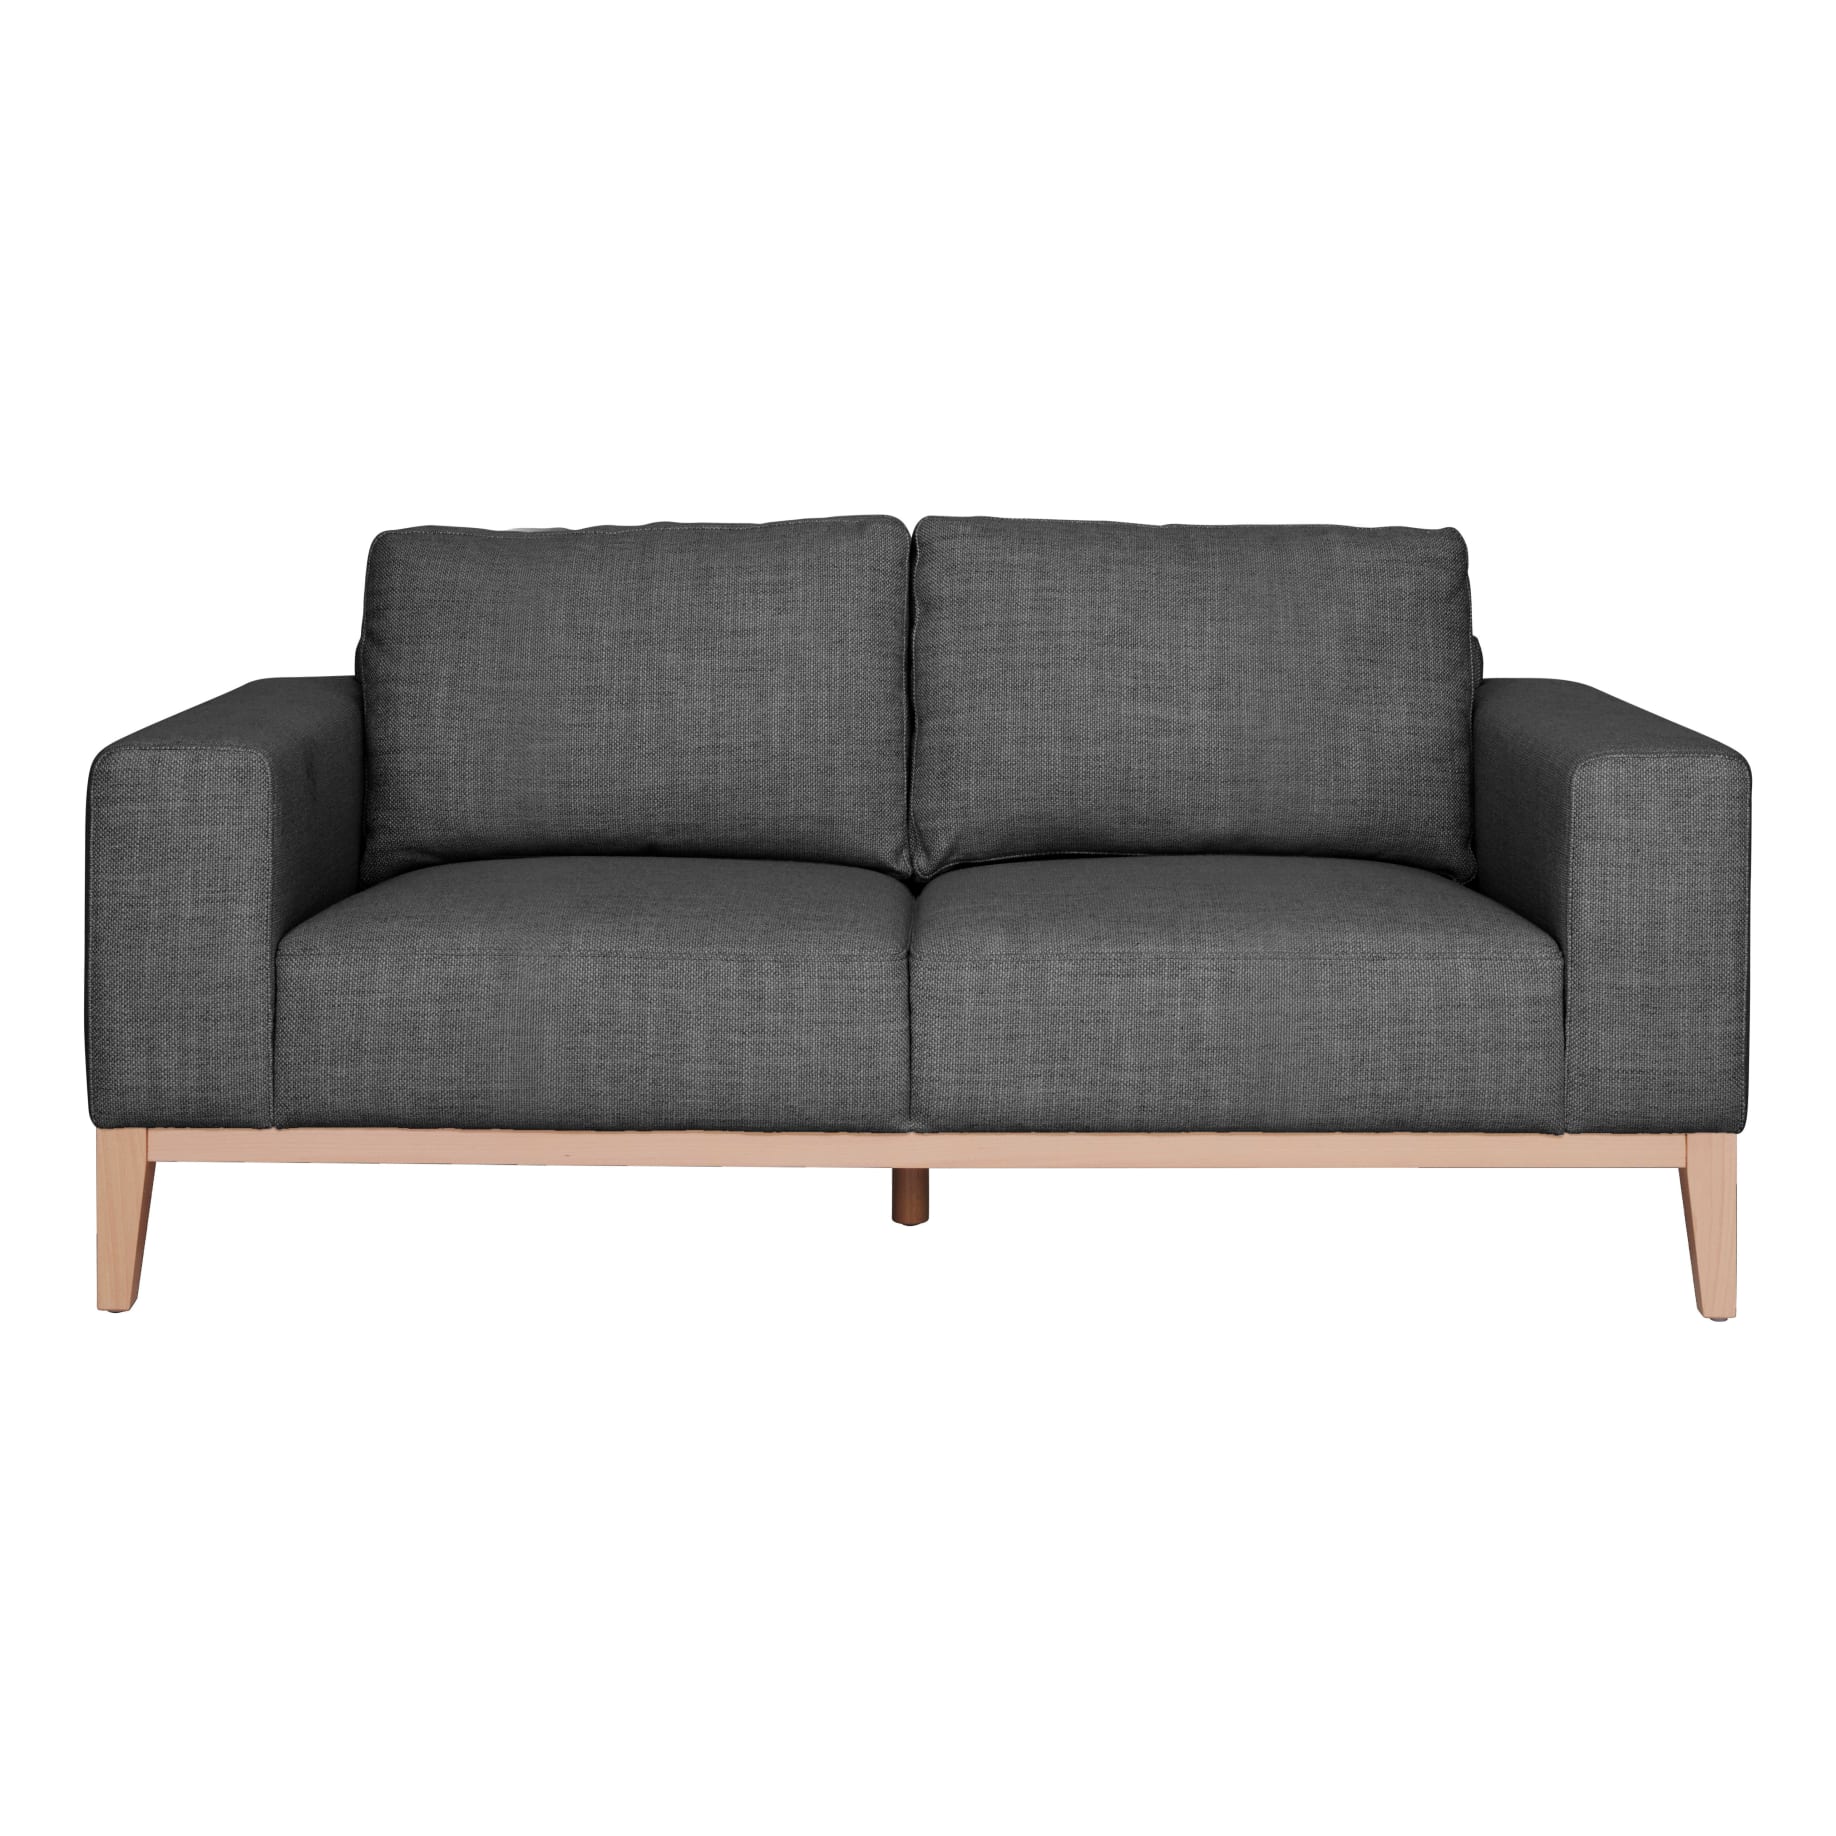 Moana 2 Seater in Kind Charcoal